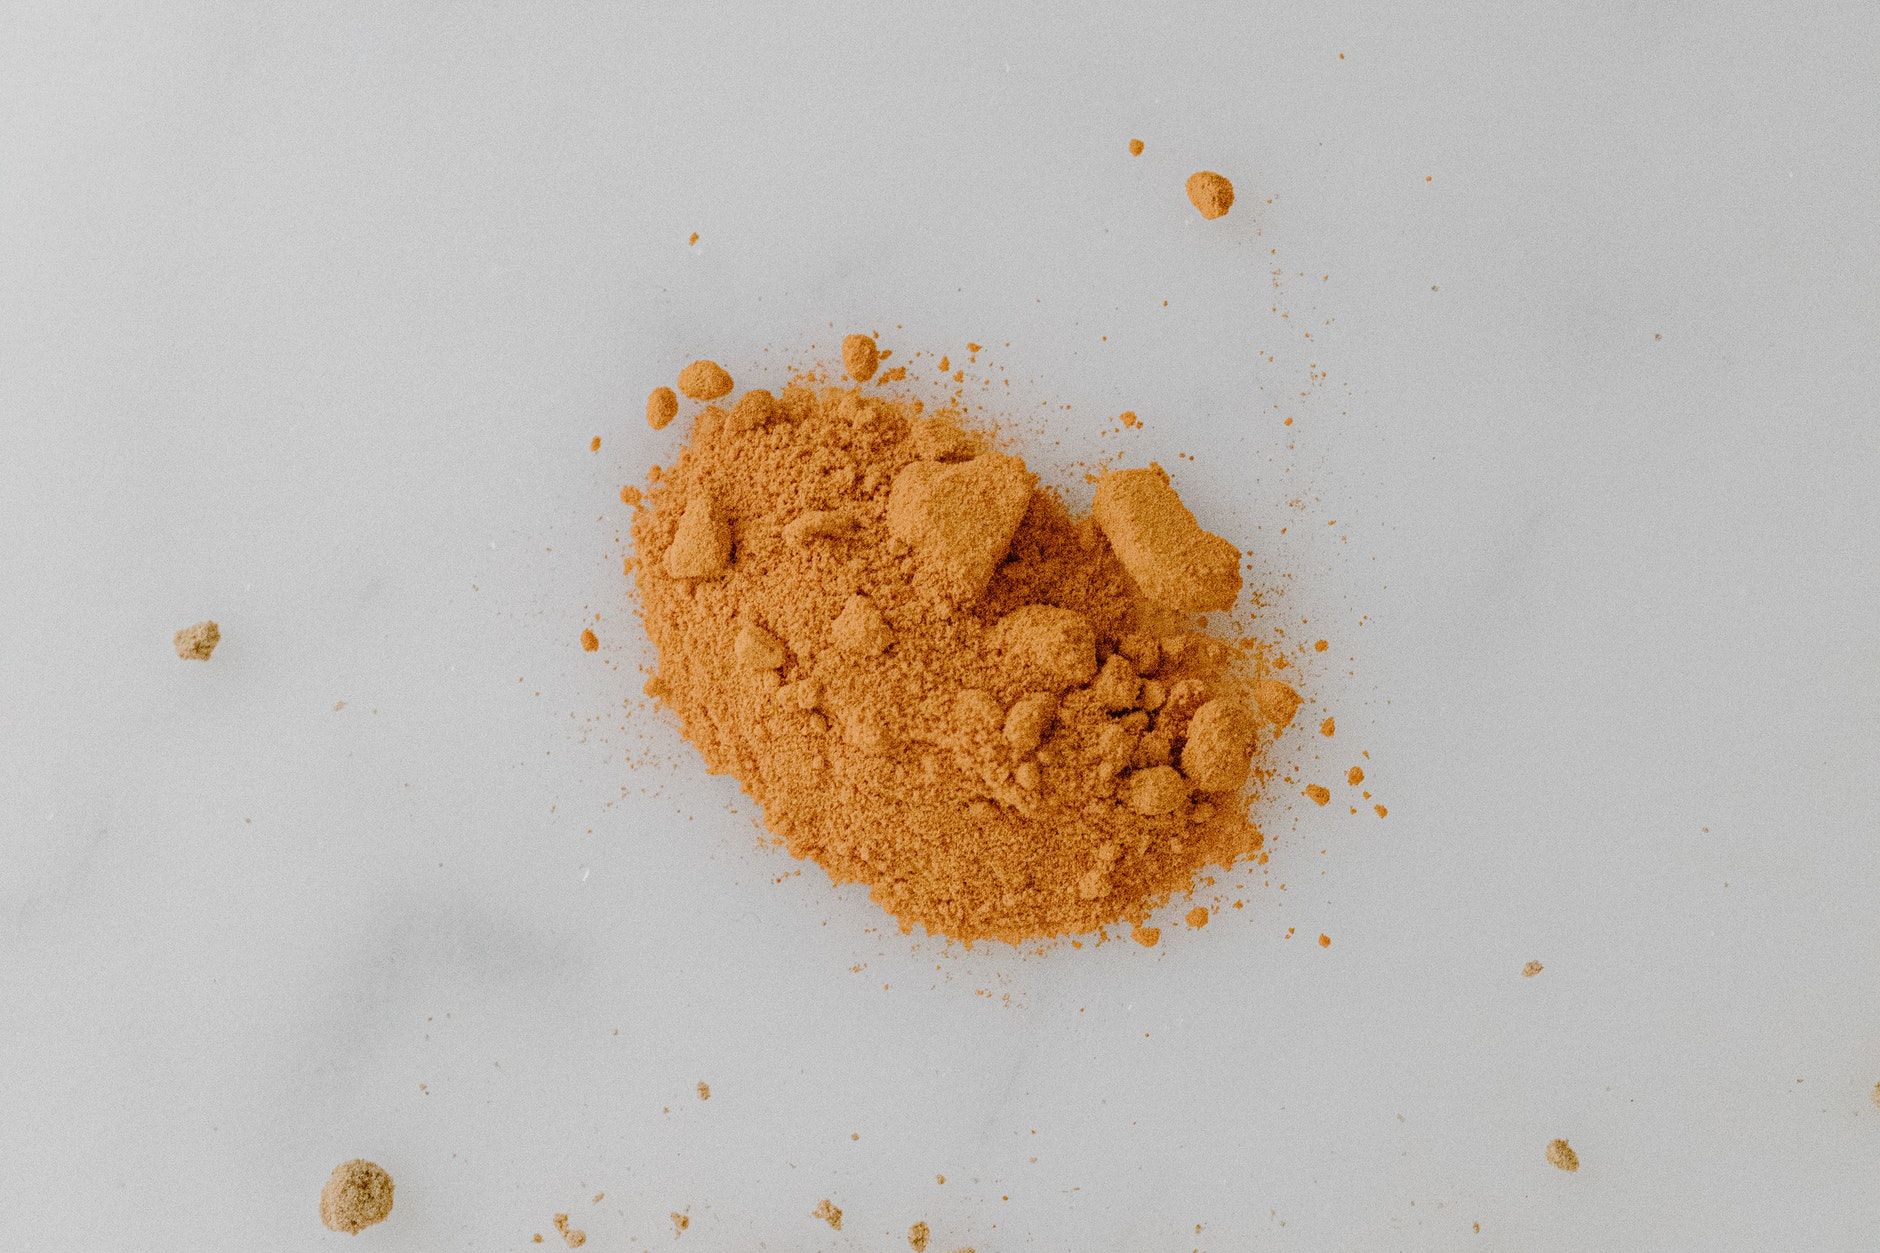 Tumeric is good, healthy spice to introduce to babies